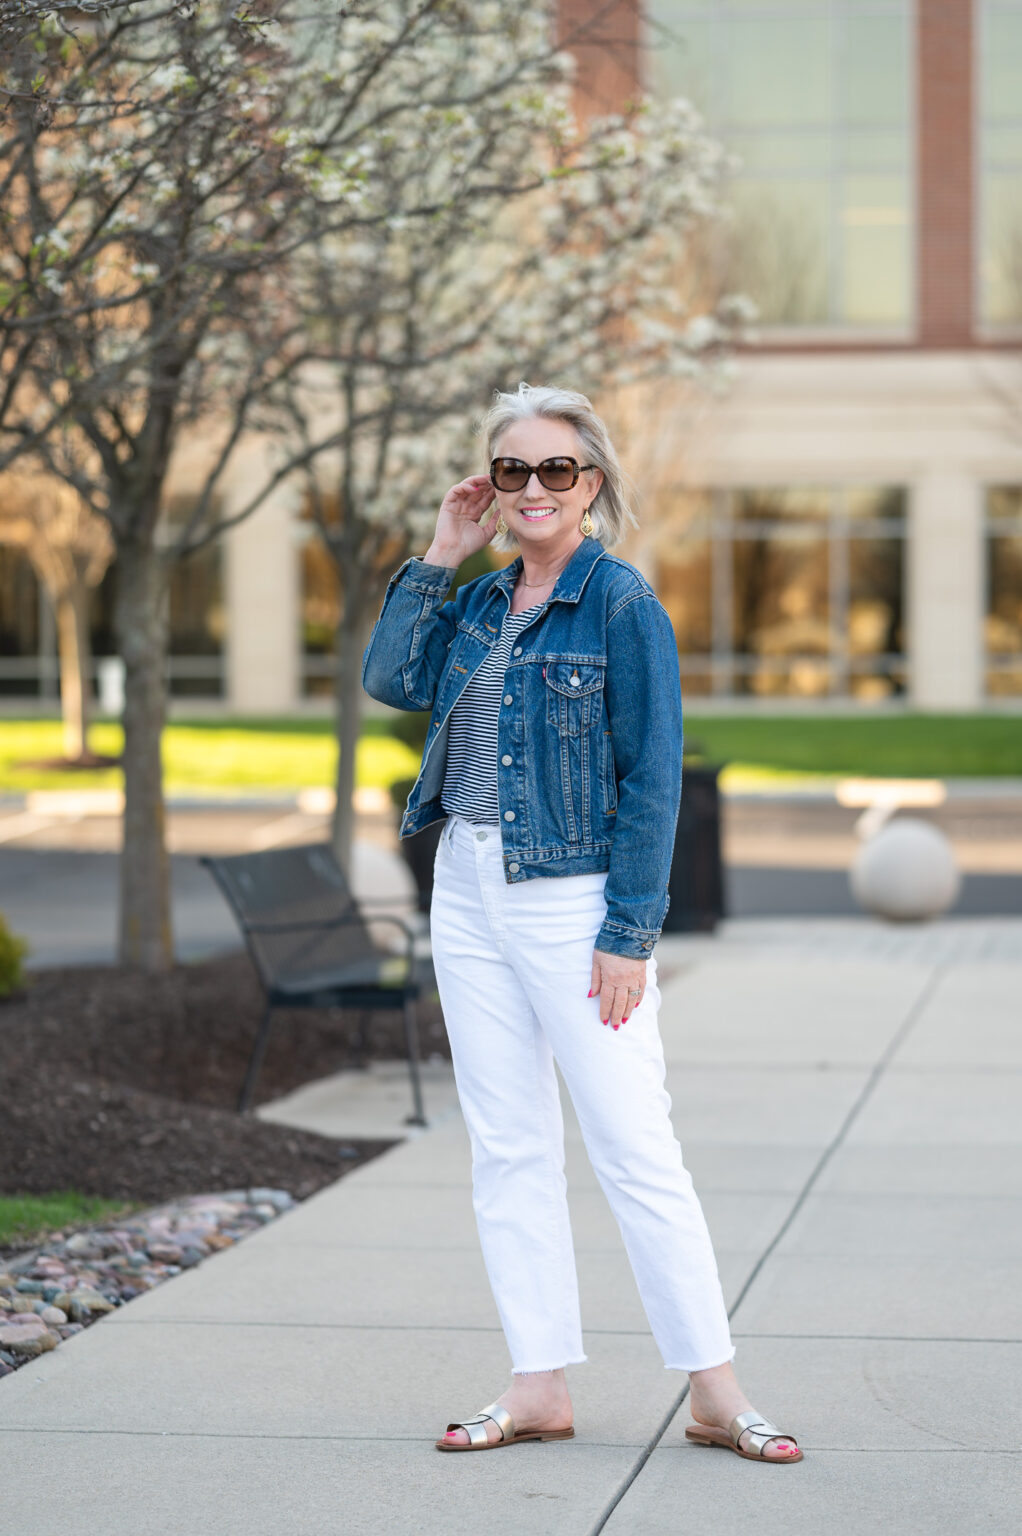 Add Versatility to Your Spring Wardrobe - Dressed for My Day